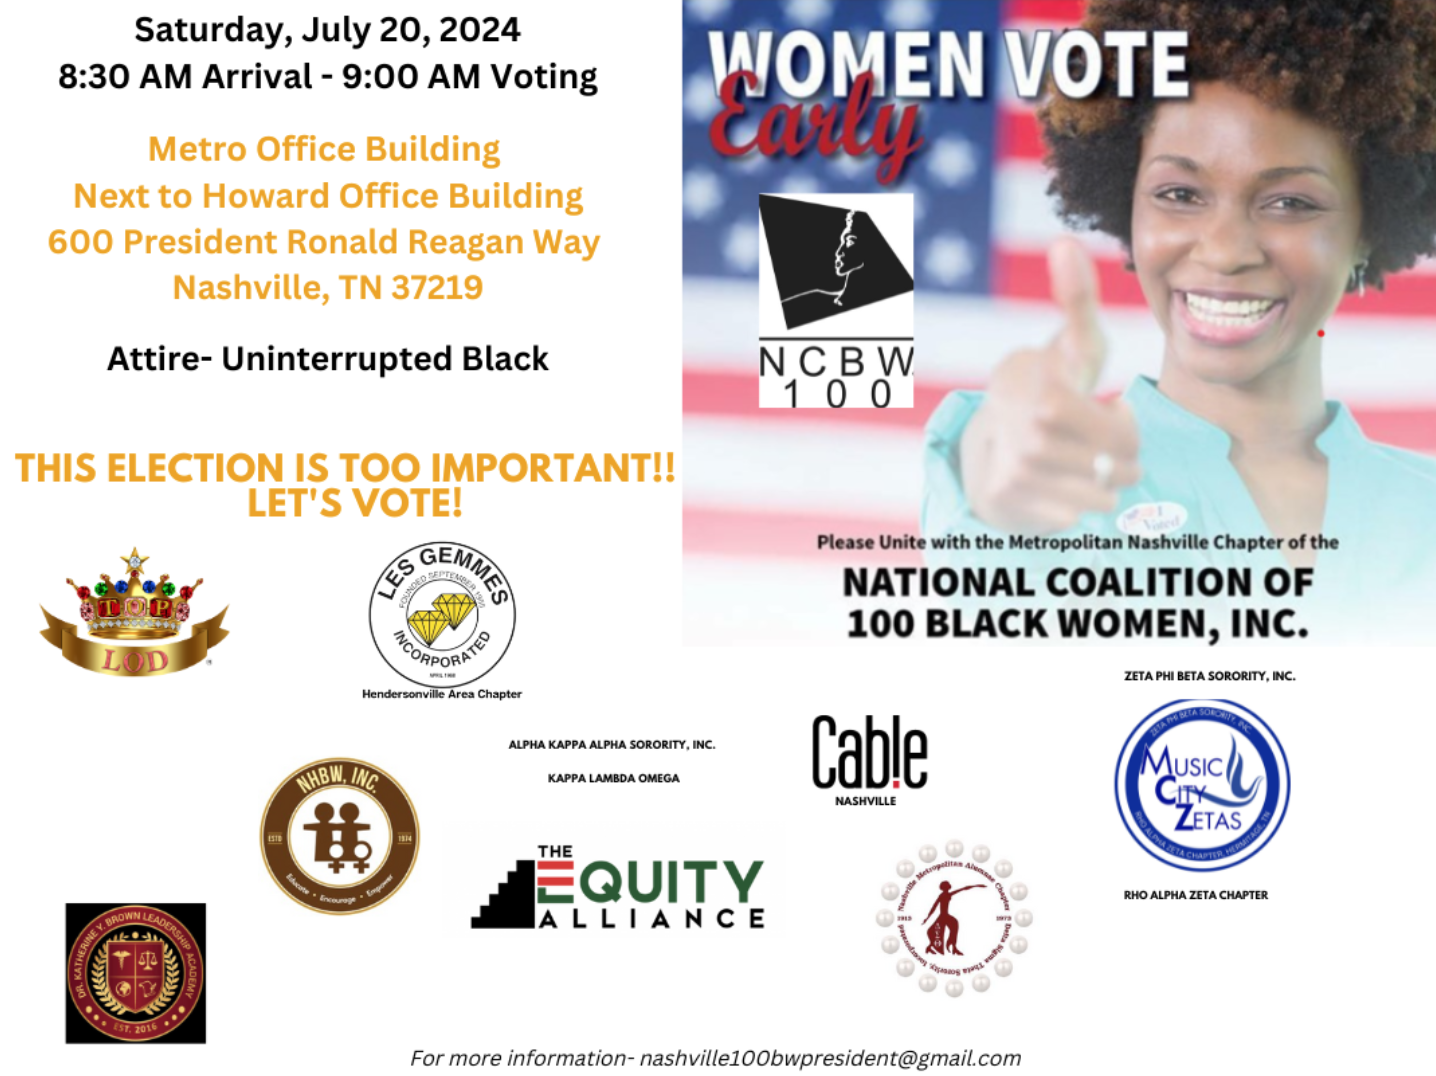 07/20/24 Women Vote Early presented by the National Coalition of 100 Black Women, Inc.